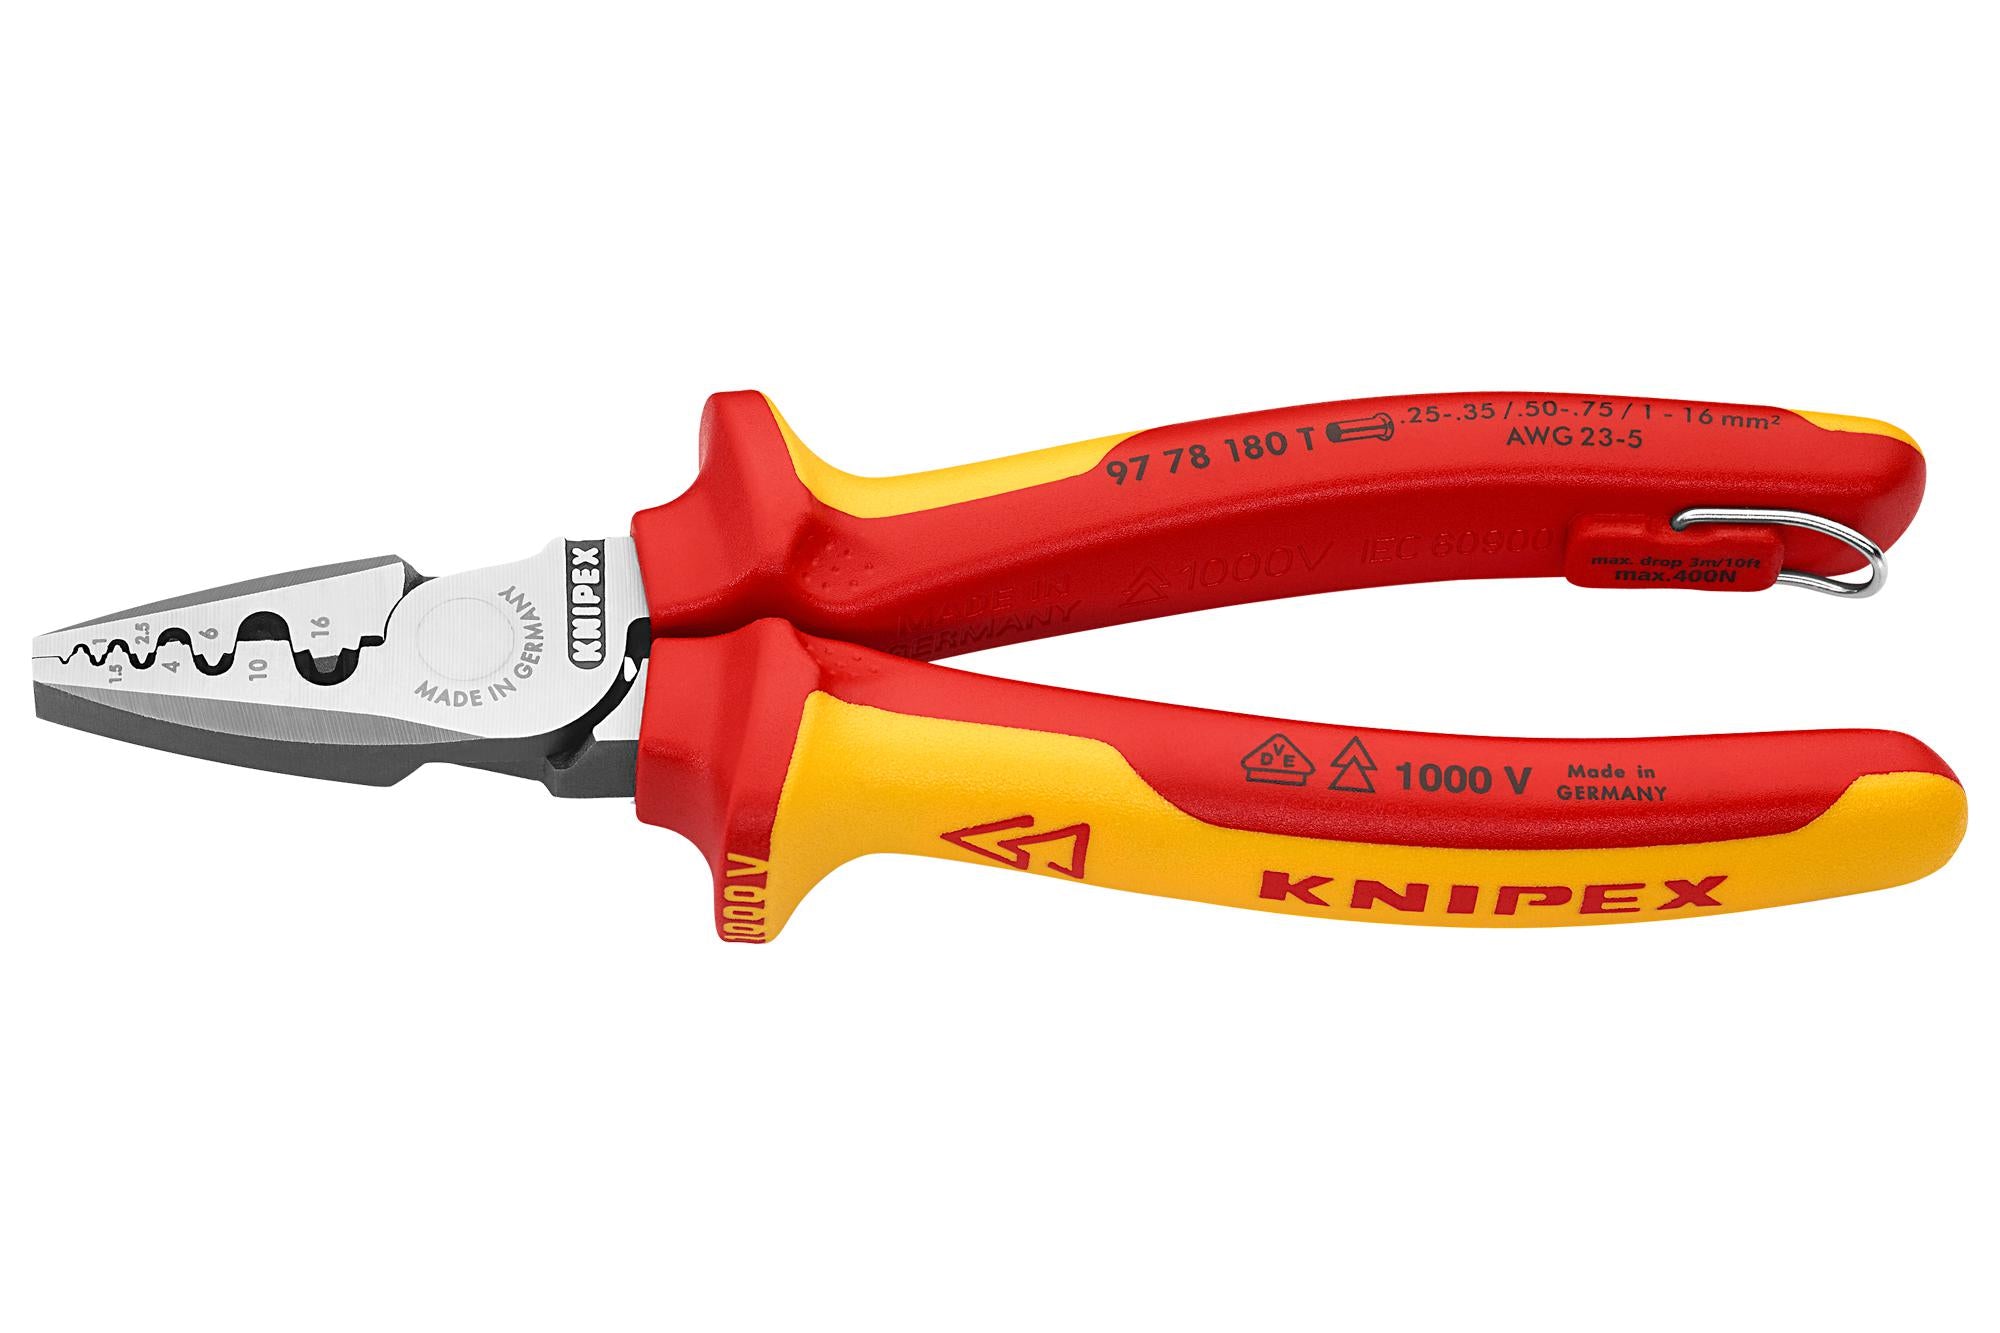 97 78 180 T CRIMPING PLIER, HAND, 0.25-16MM2 SLEEVE KNIPEX